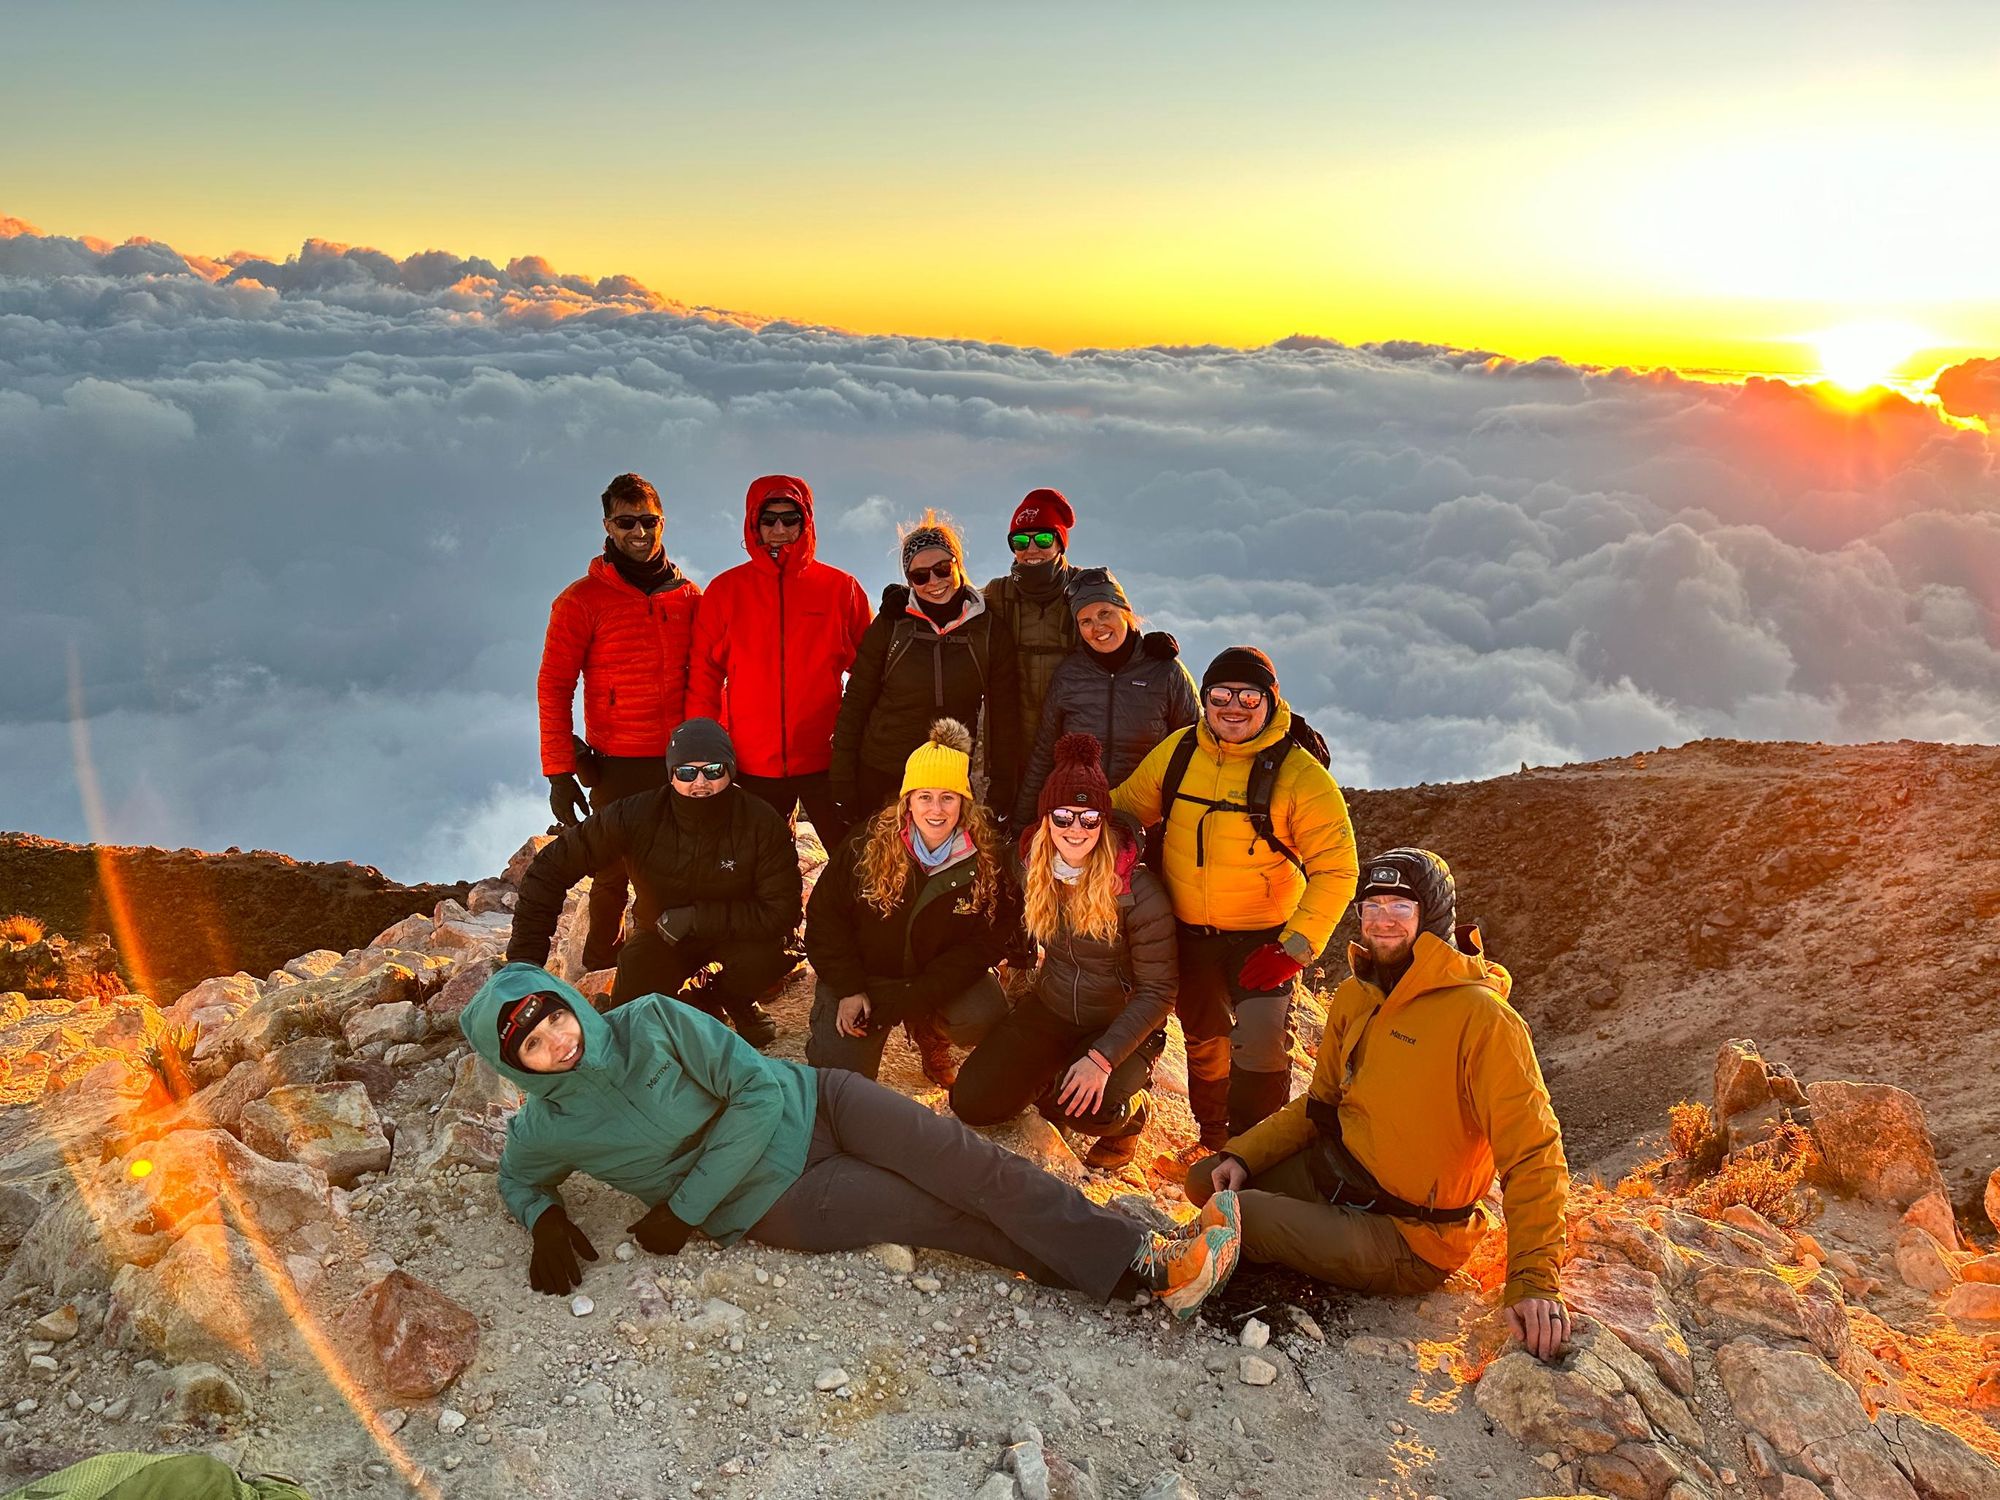 A Much Better Adventures group on the Guatemala 5 Volcano Challenge. Photo: Emily Wright.